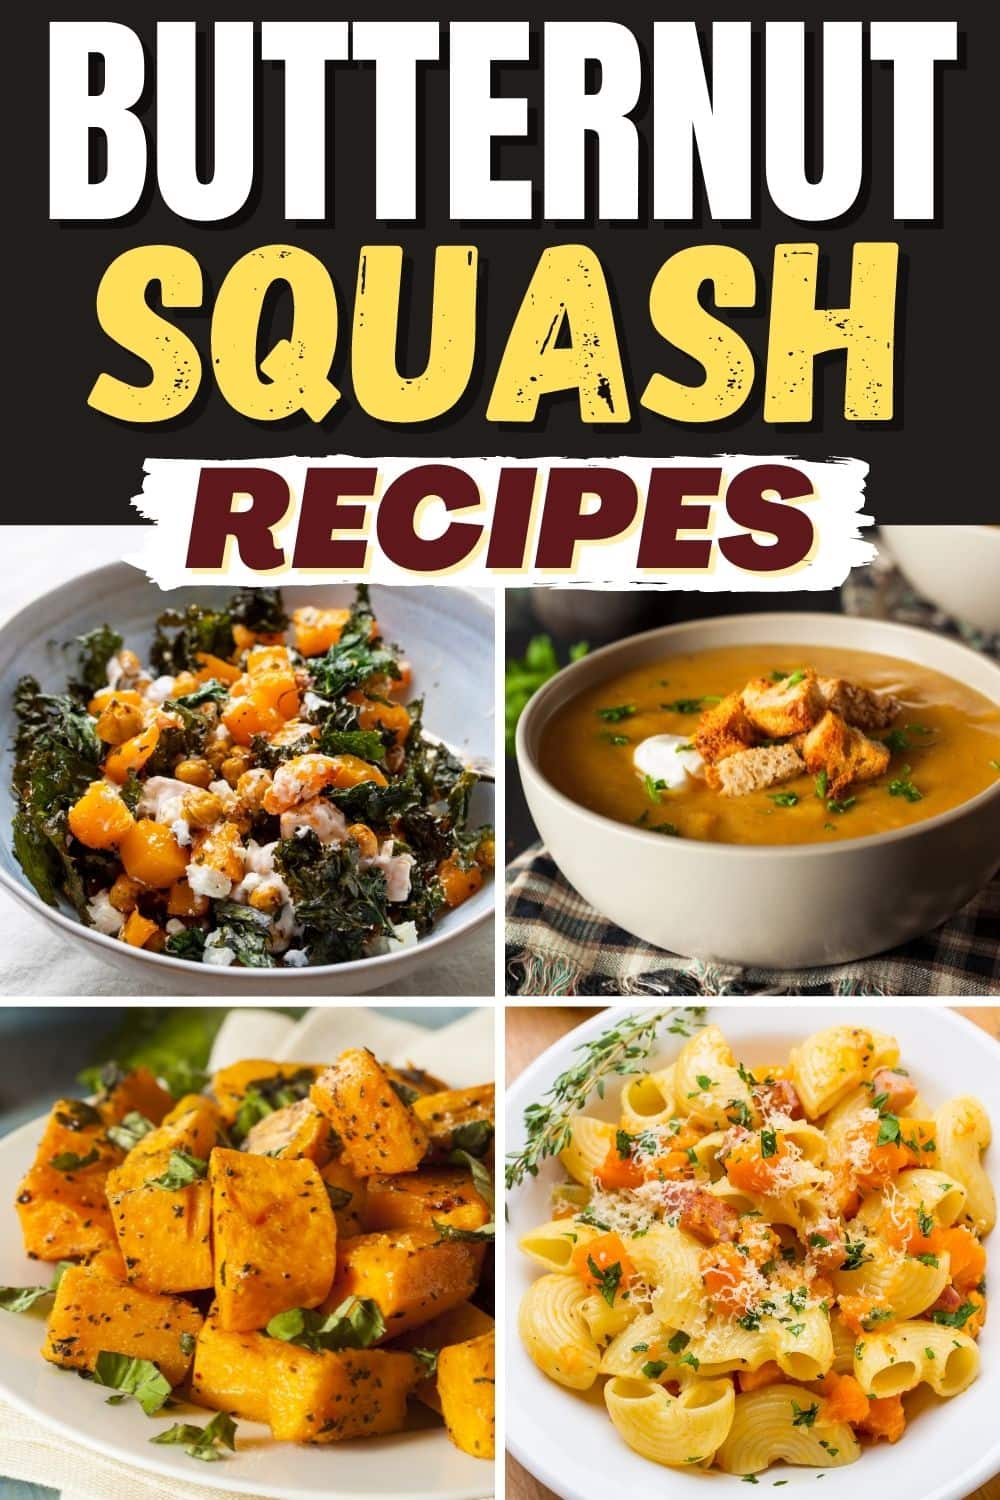 35 Easy Butternut Squash Recipes - Insanely Good